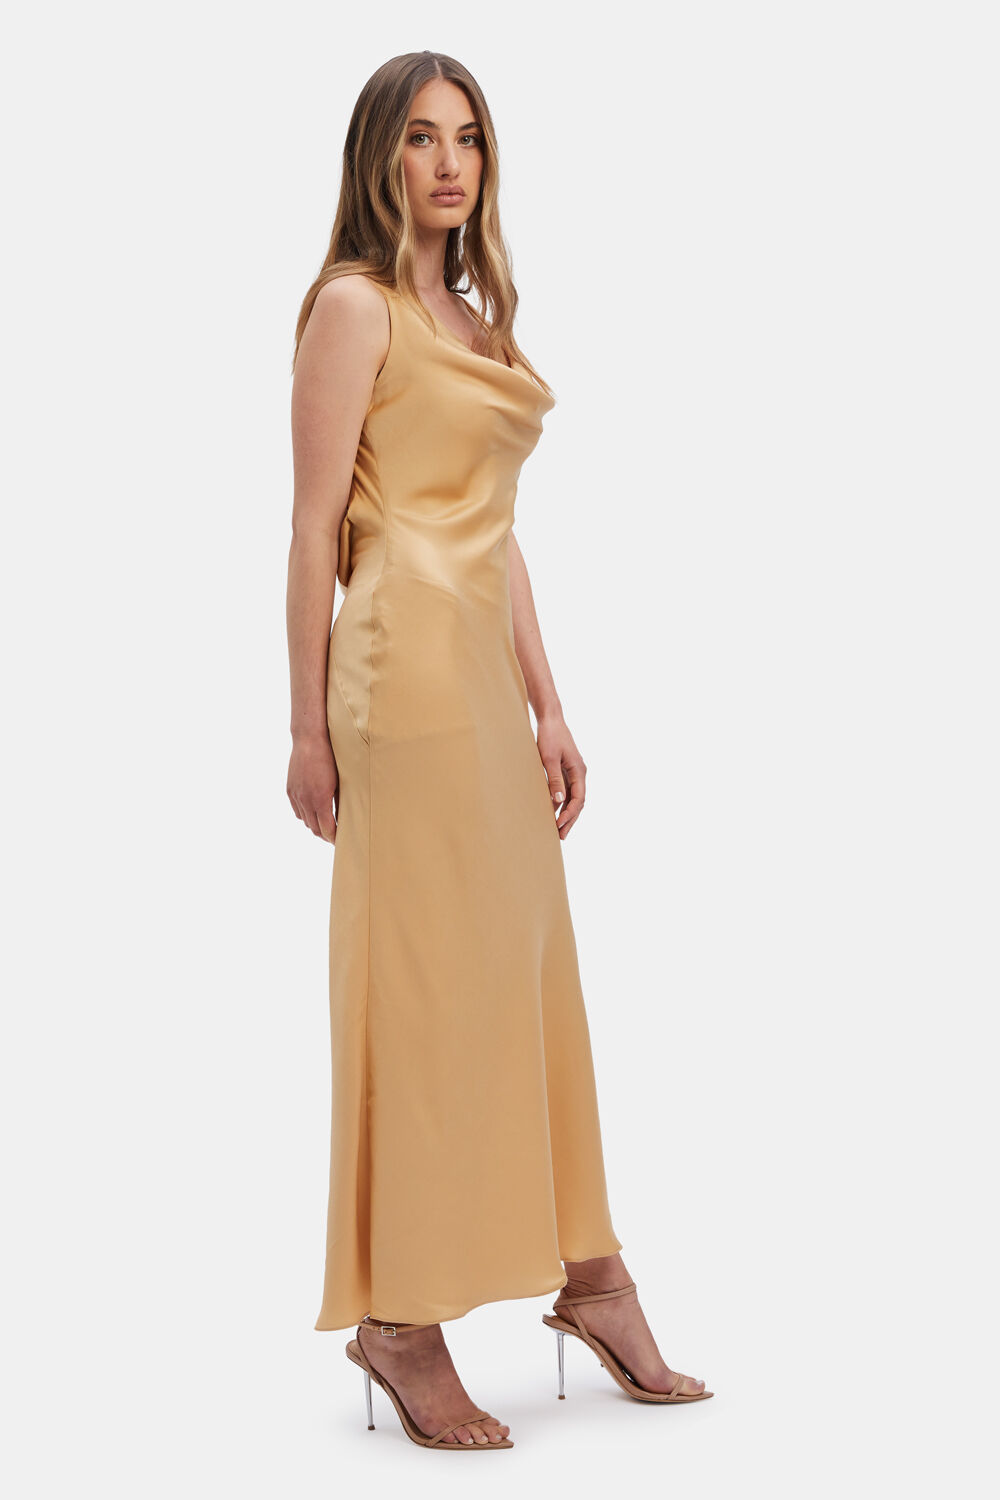 ADONIA COWL DRESS in colour CHAMPAGNE BEIGE